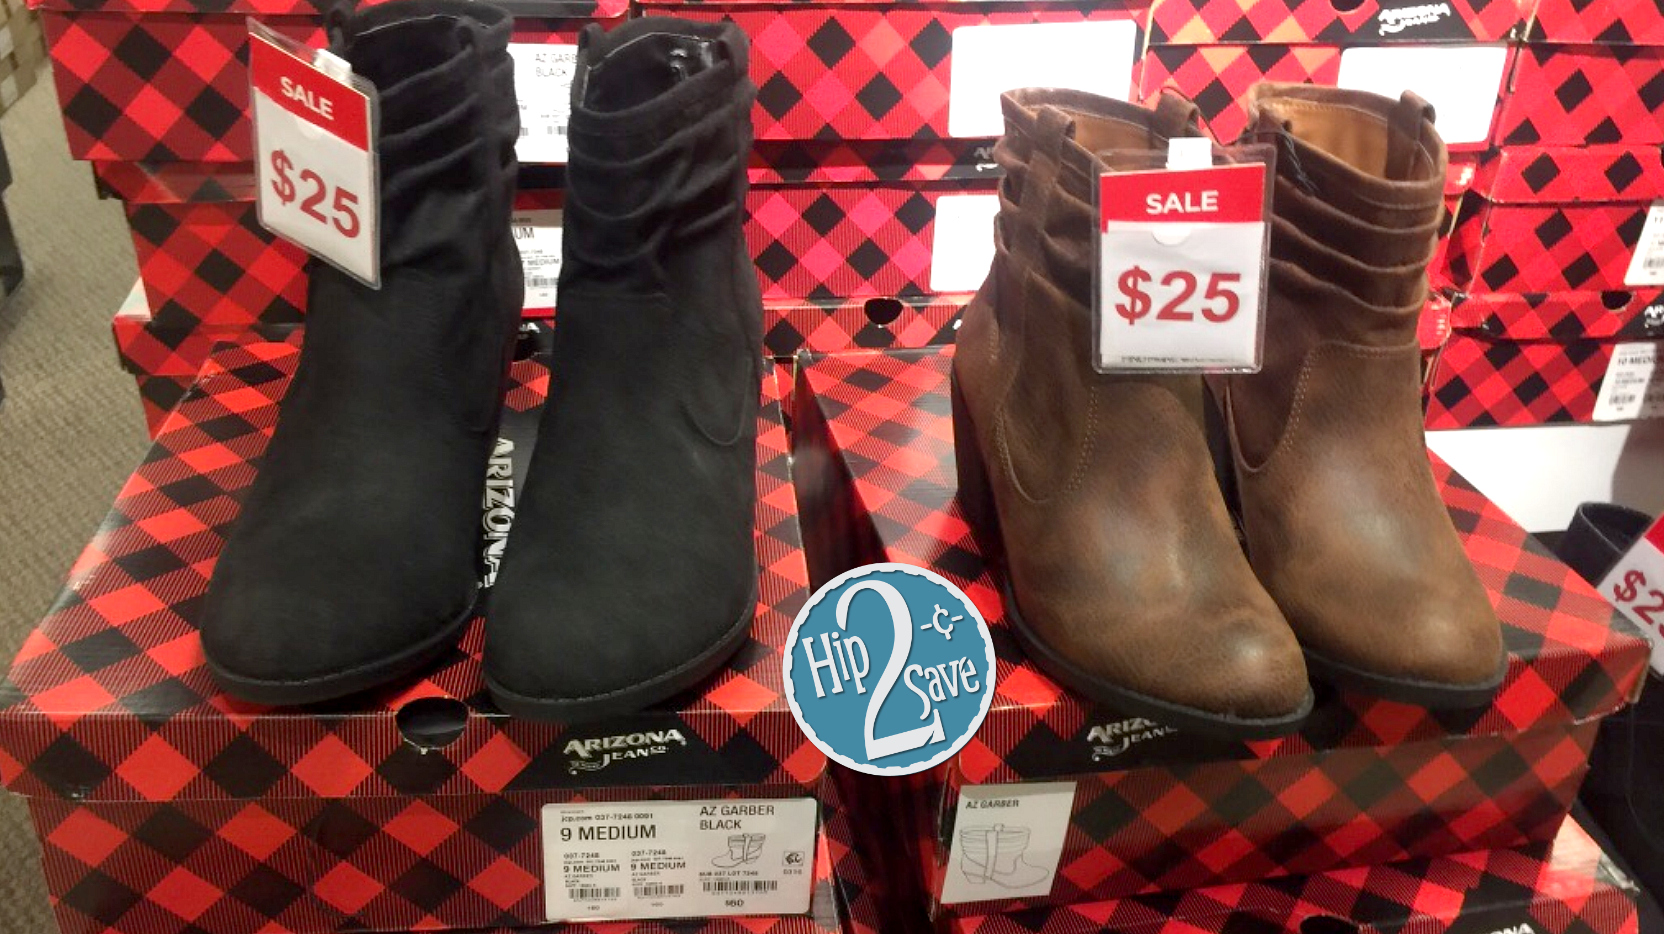 jcpenney polo boots